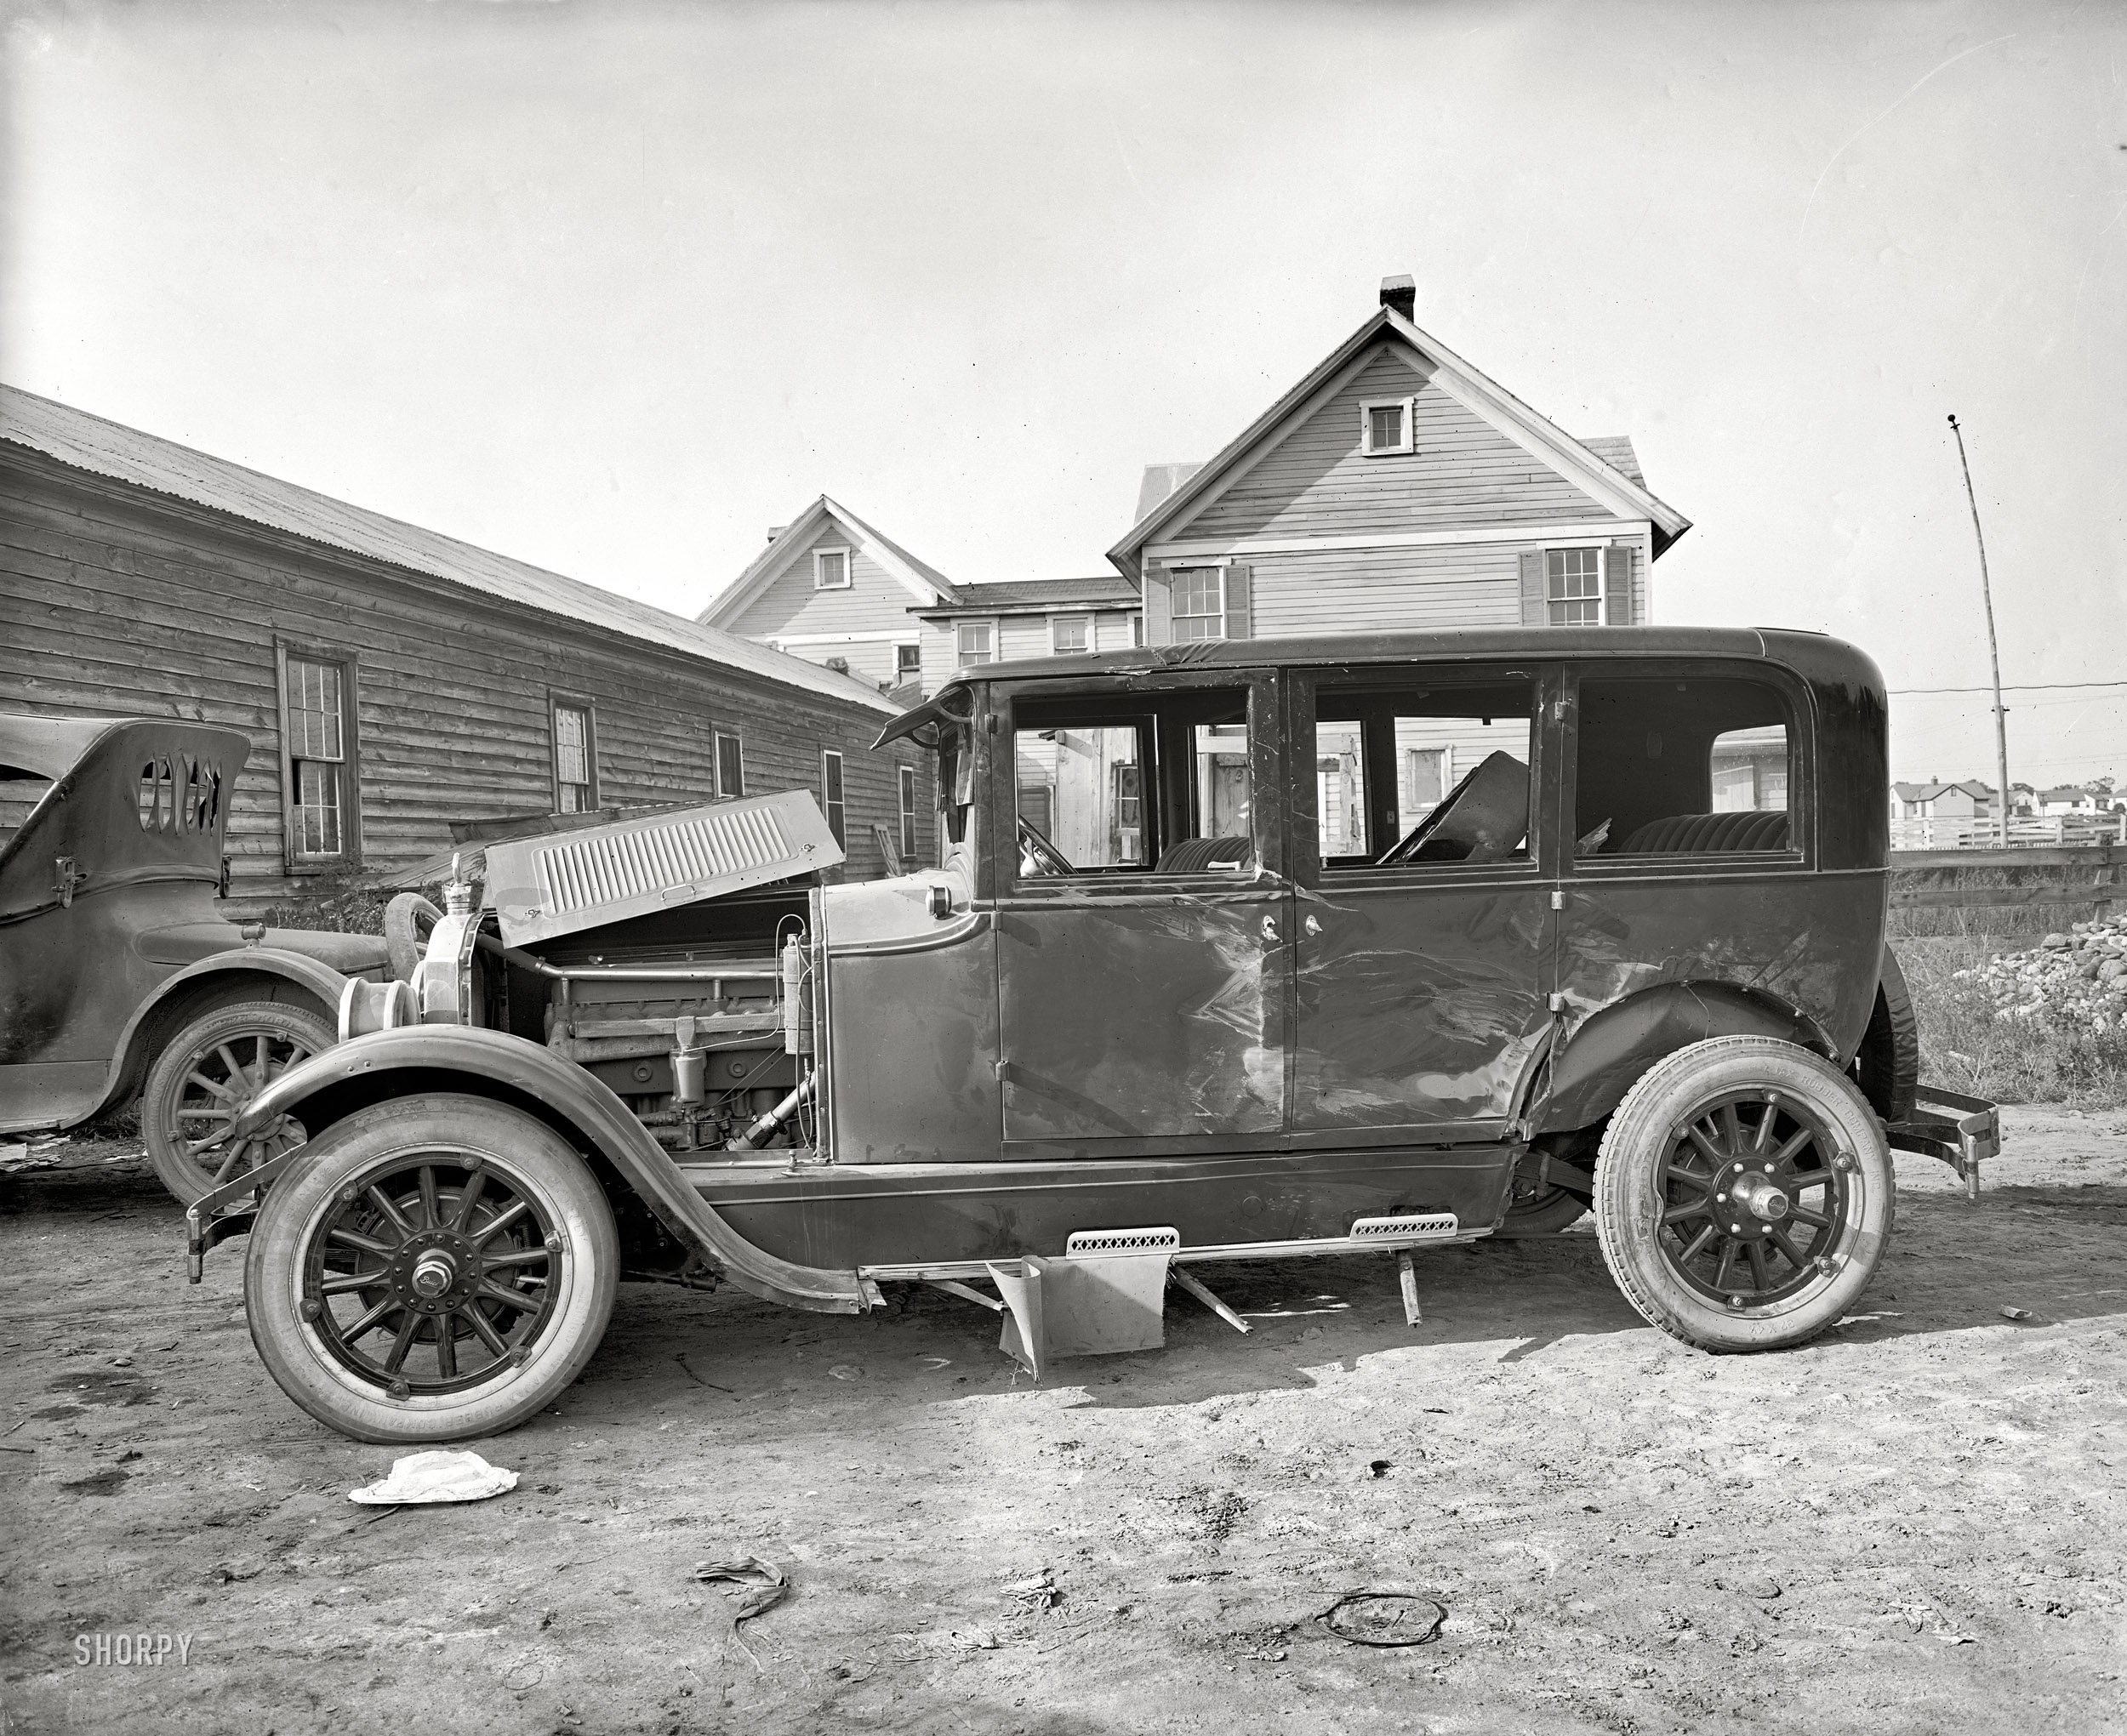 Washington, D.C., or vicinity, 1924. "Max Wiehle." Exhibit A in the Case of the Battered Buick. National Photo Company glass negative. View full size.